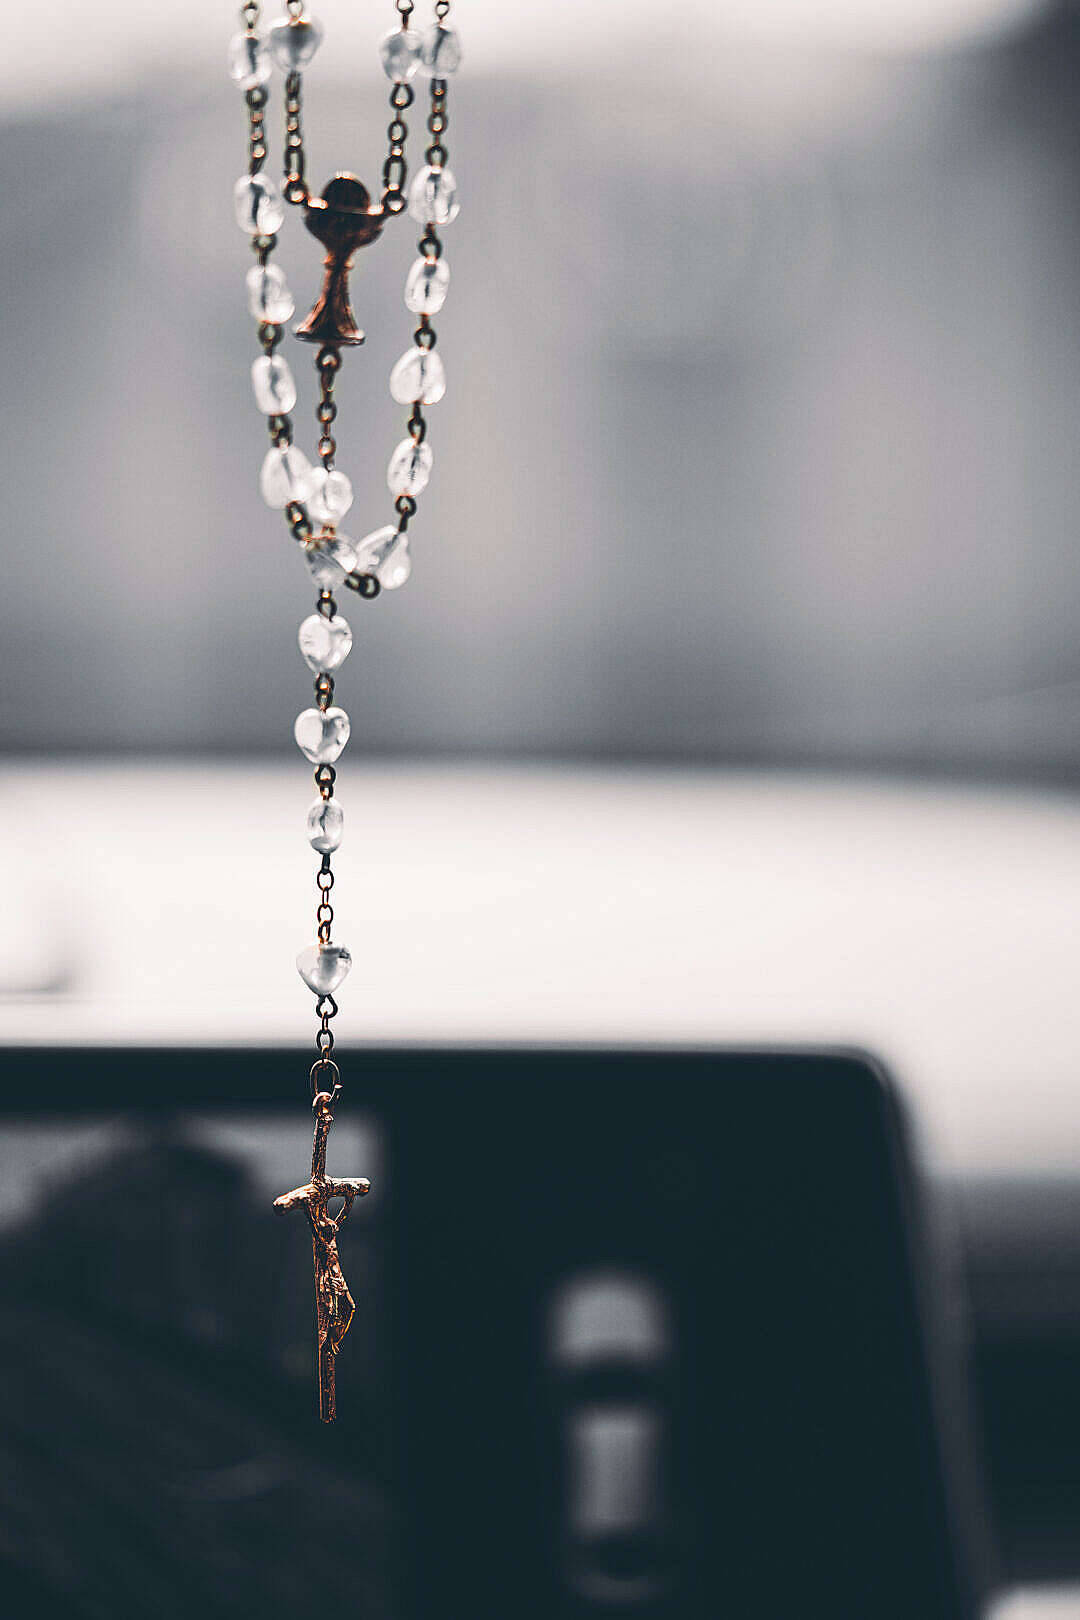 Hanging Rosary With Jesus On Cross Wallpaper